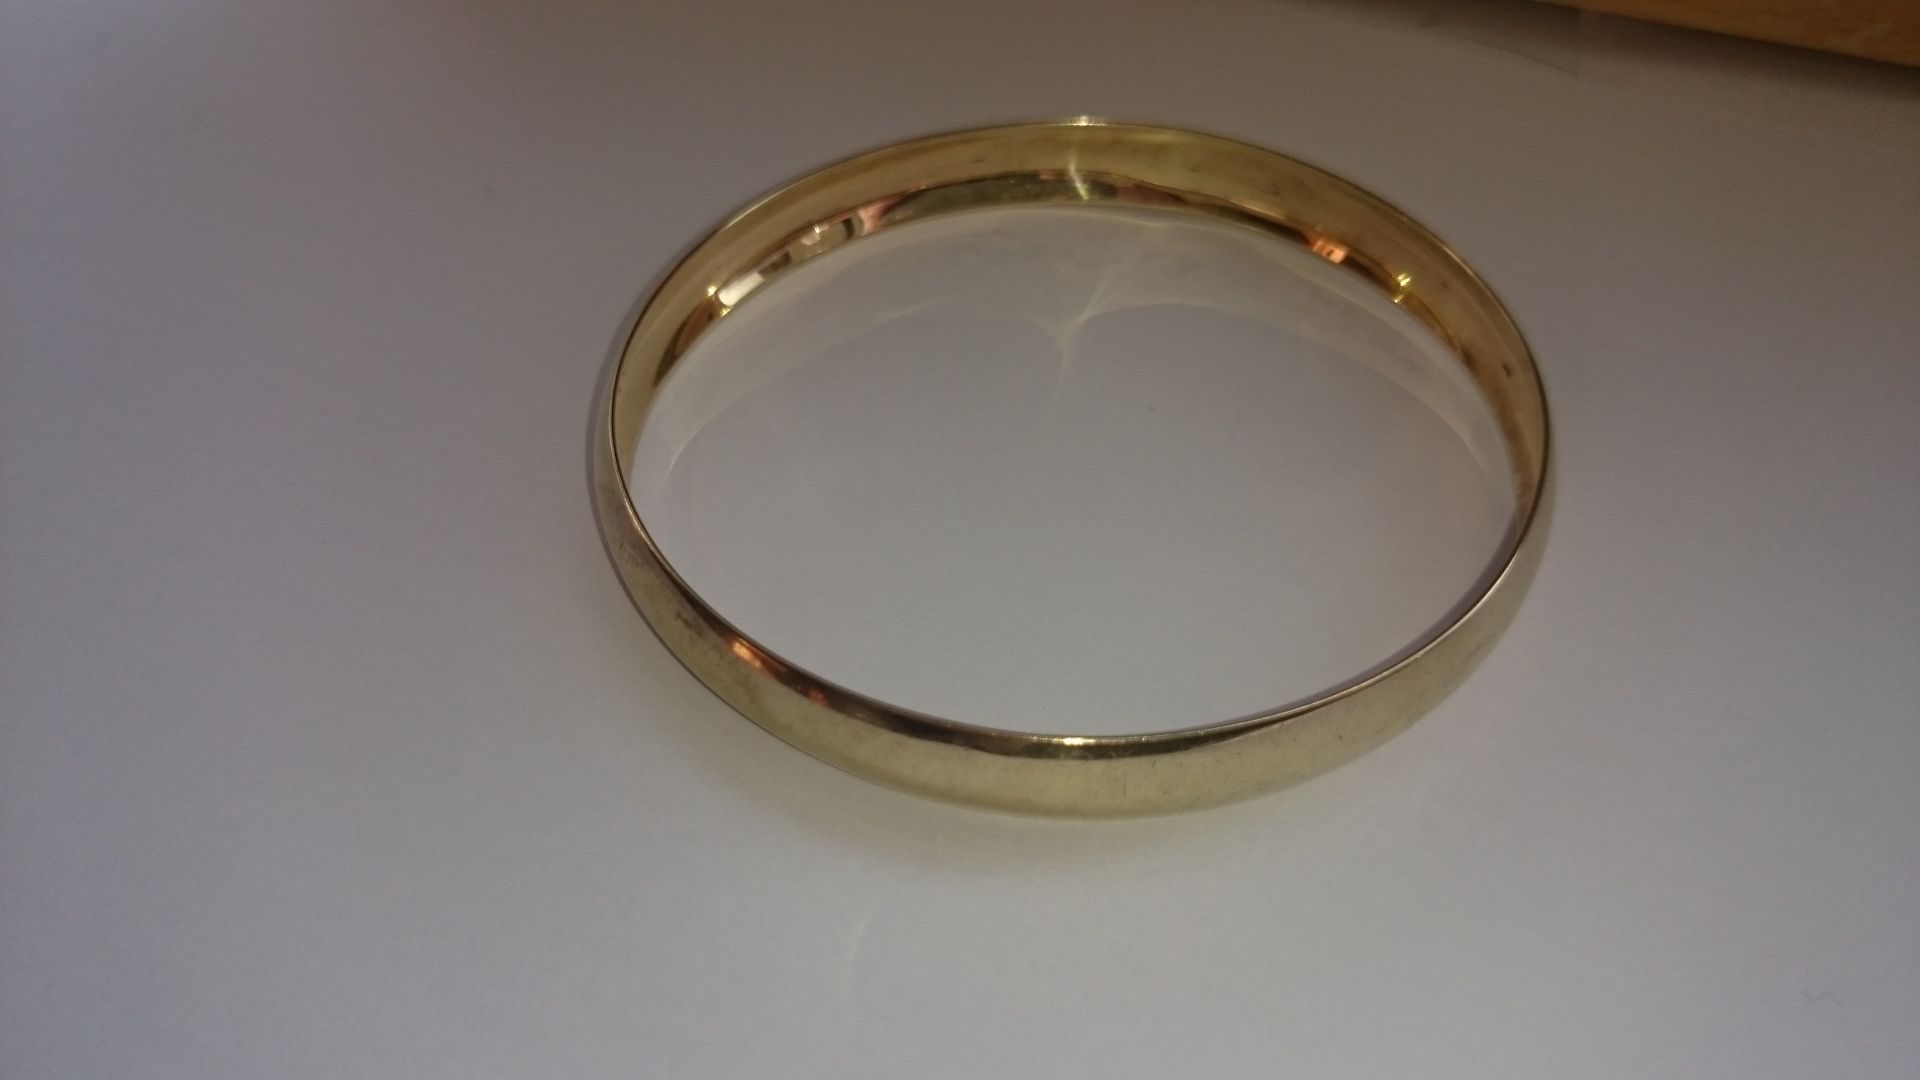 9ct solid hand made gold bangle.The bangle is domed and is 8.2mm wide. The bangle tests 9ct.